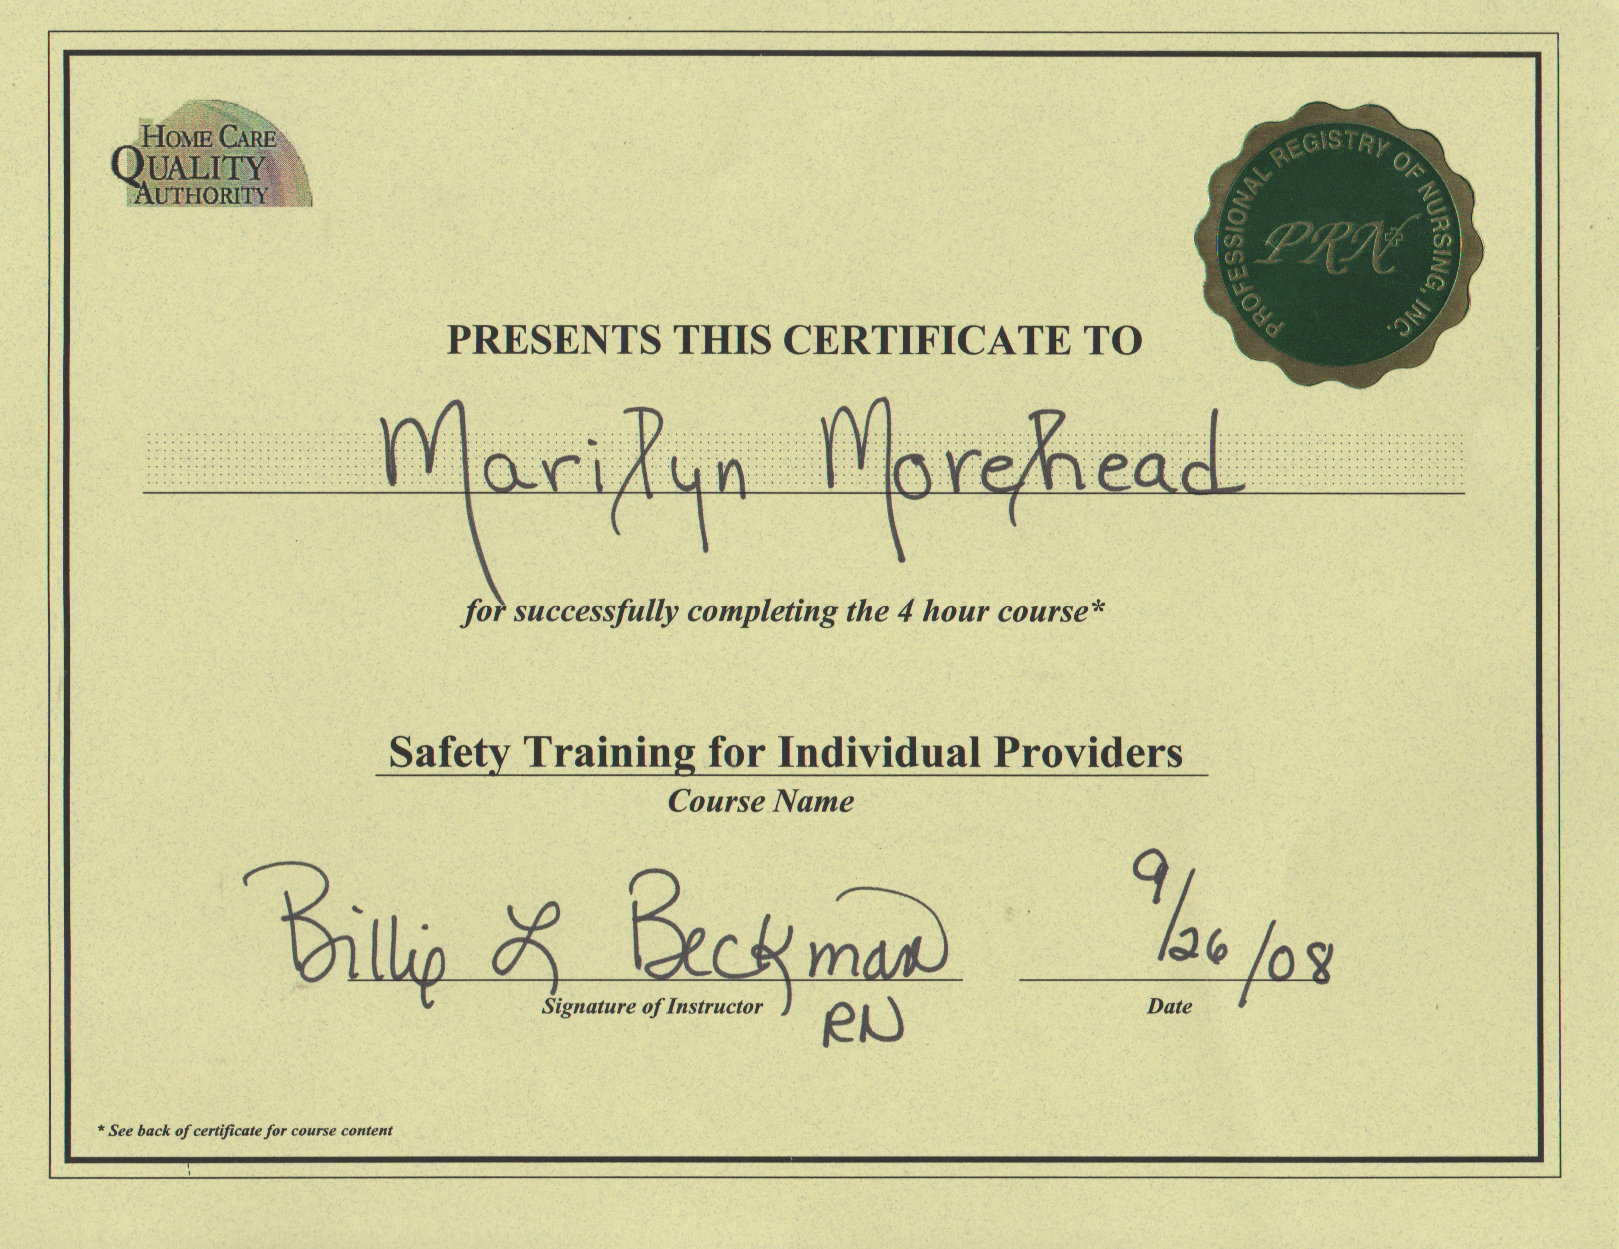 2008-09-26 - Marilyn Morehead Certification - Home Care-1.png